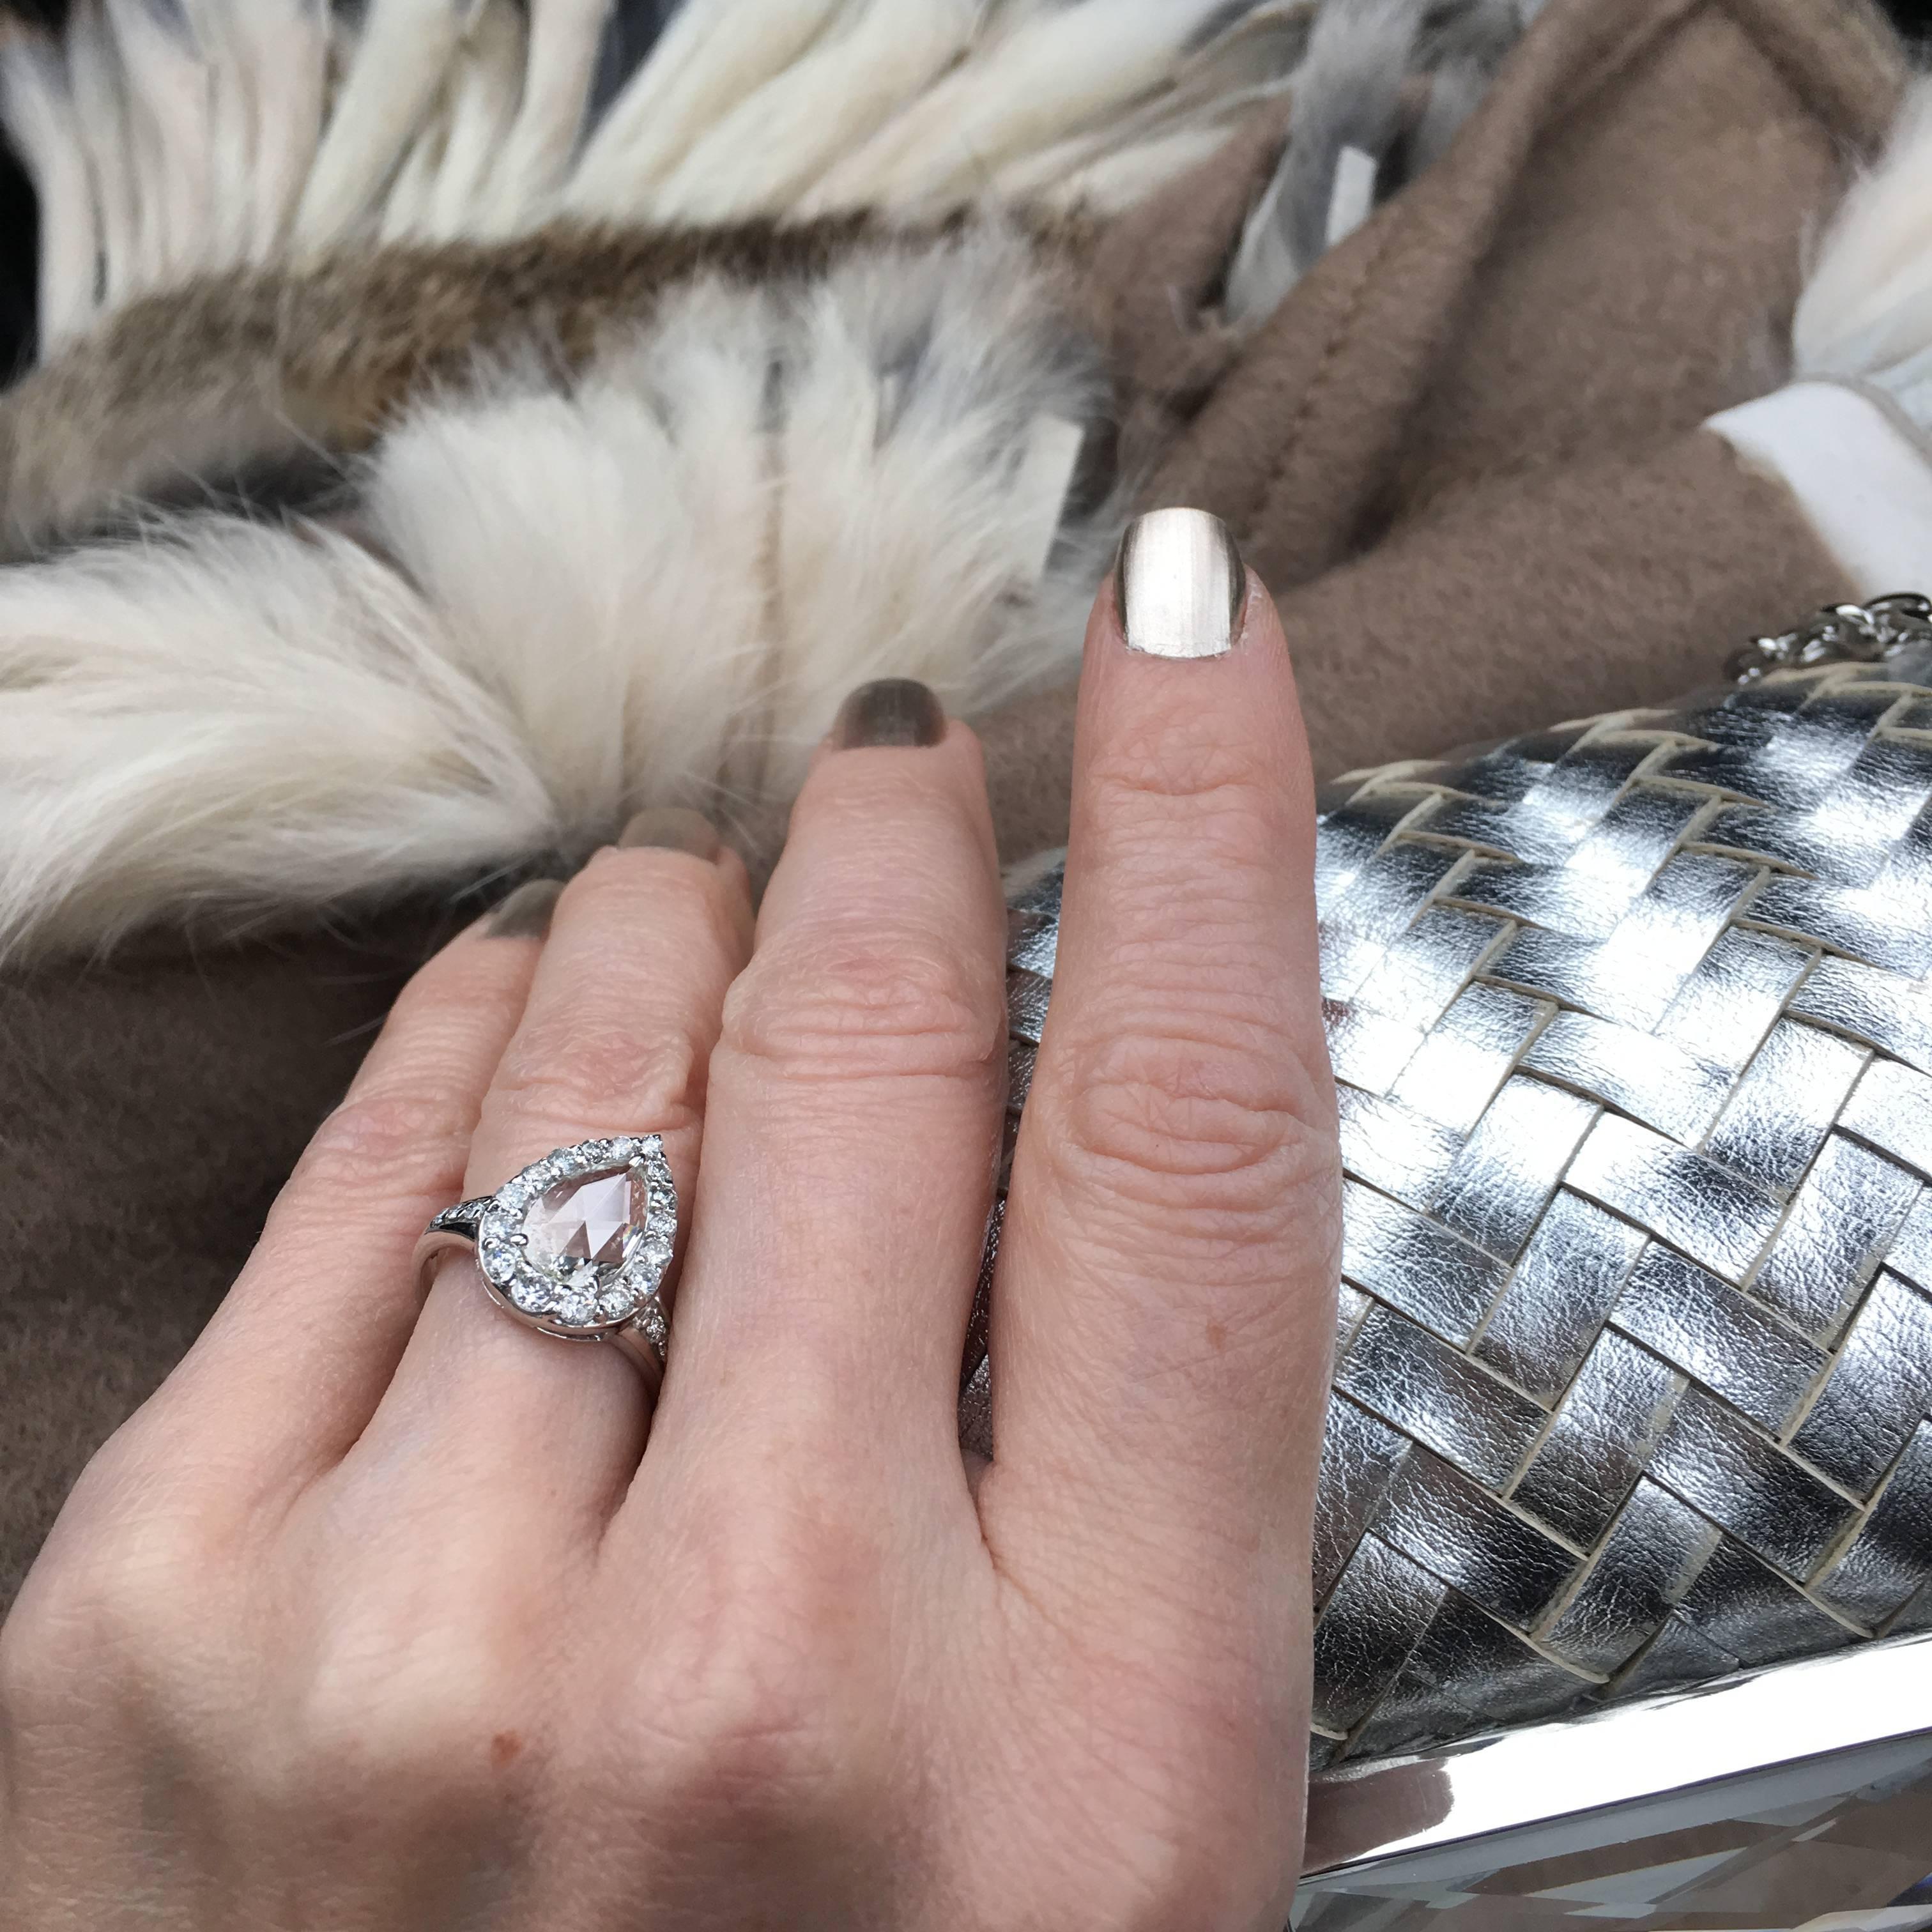 A true wow diamond ring!  This spectacular center Rose Cut Diamond is surrounded by white faceted round diamonds of graduated size, giving it a balanced and brilliant overall look.  Feminine, gorgeous and significant.   Set in 18kt White gold. 